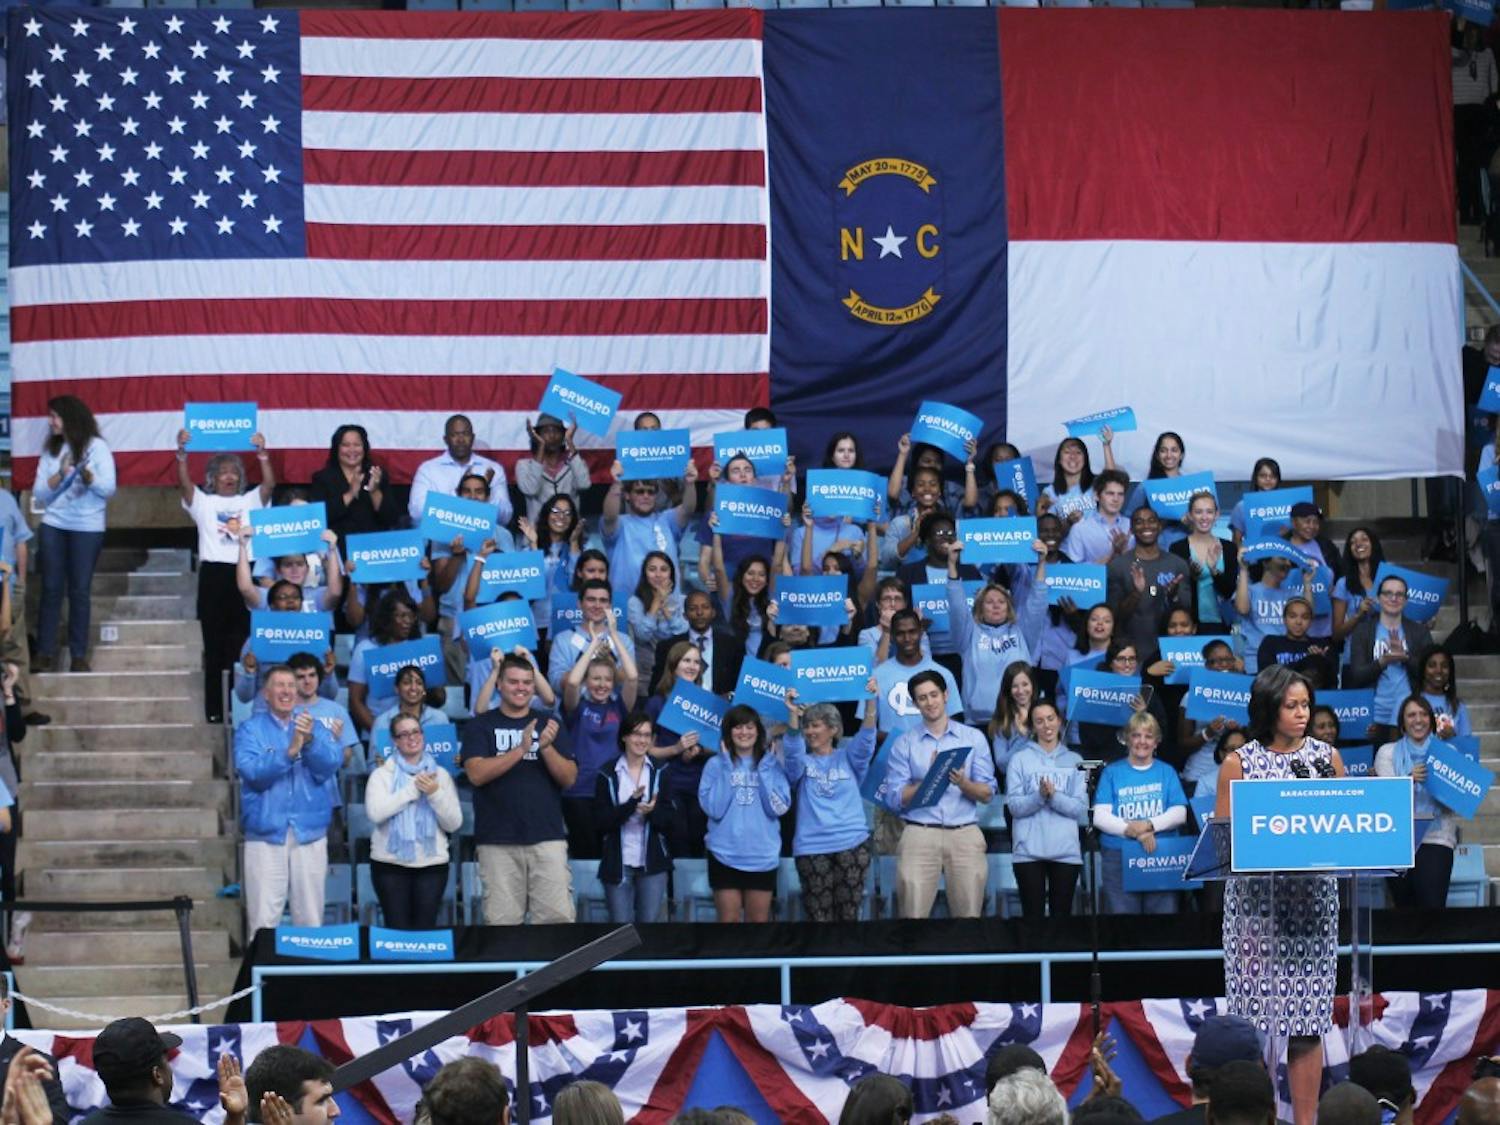 	First Lady Michelle Obama speaks to students and supporters in Carmichael Arena at UNC on Tuesday.